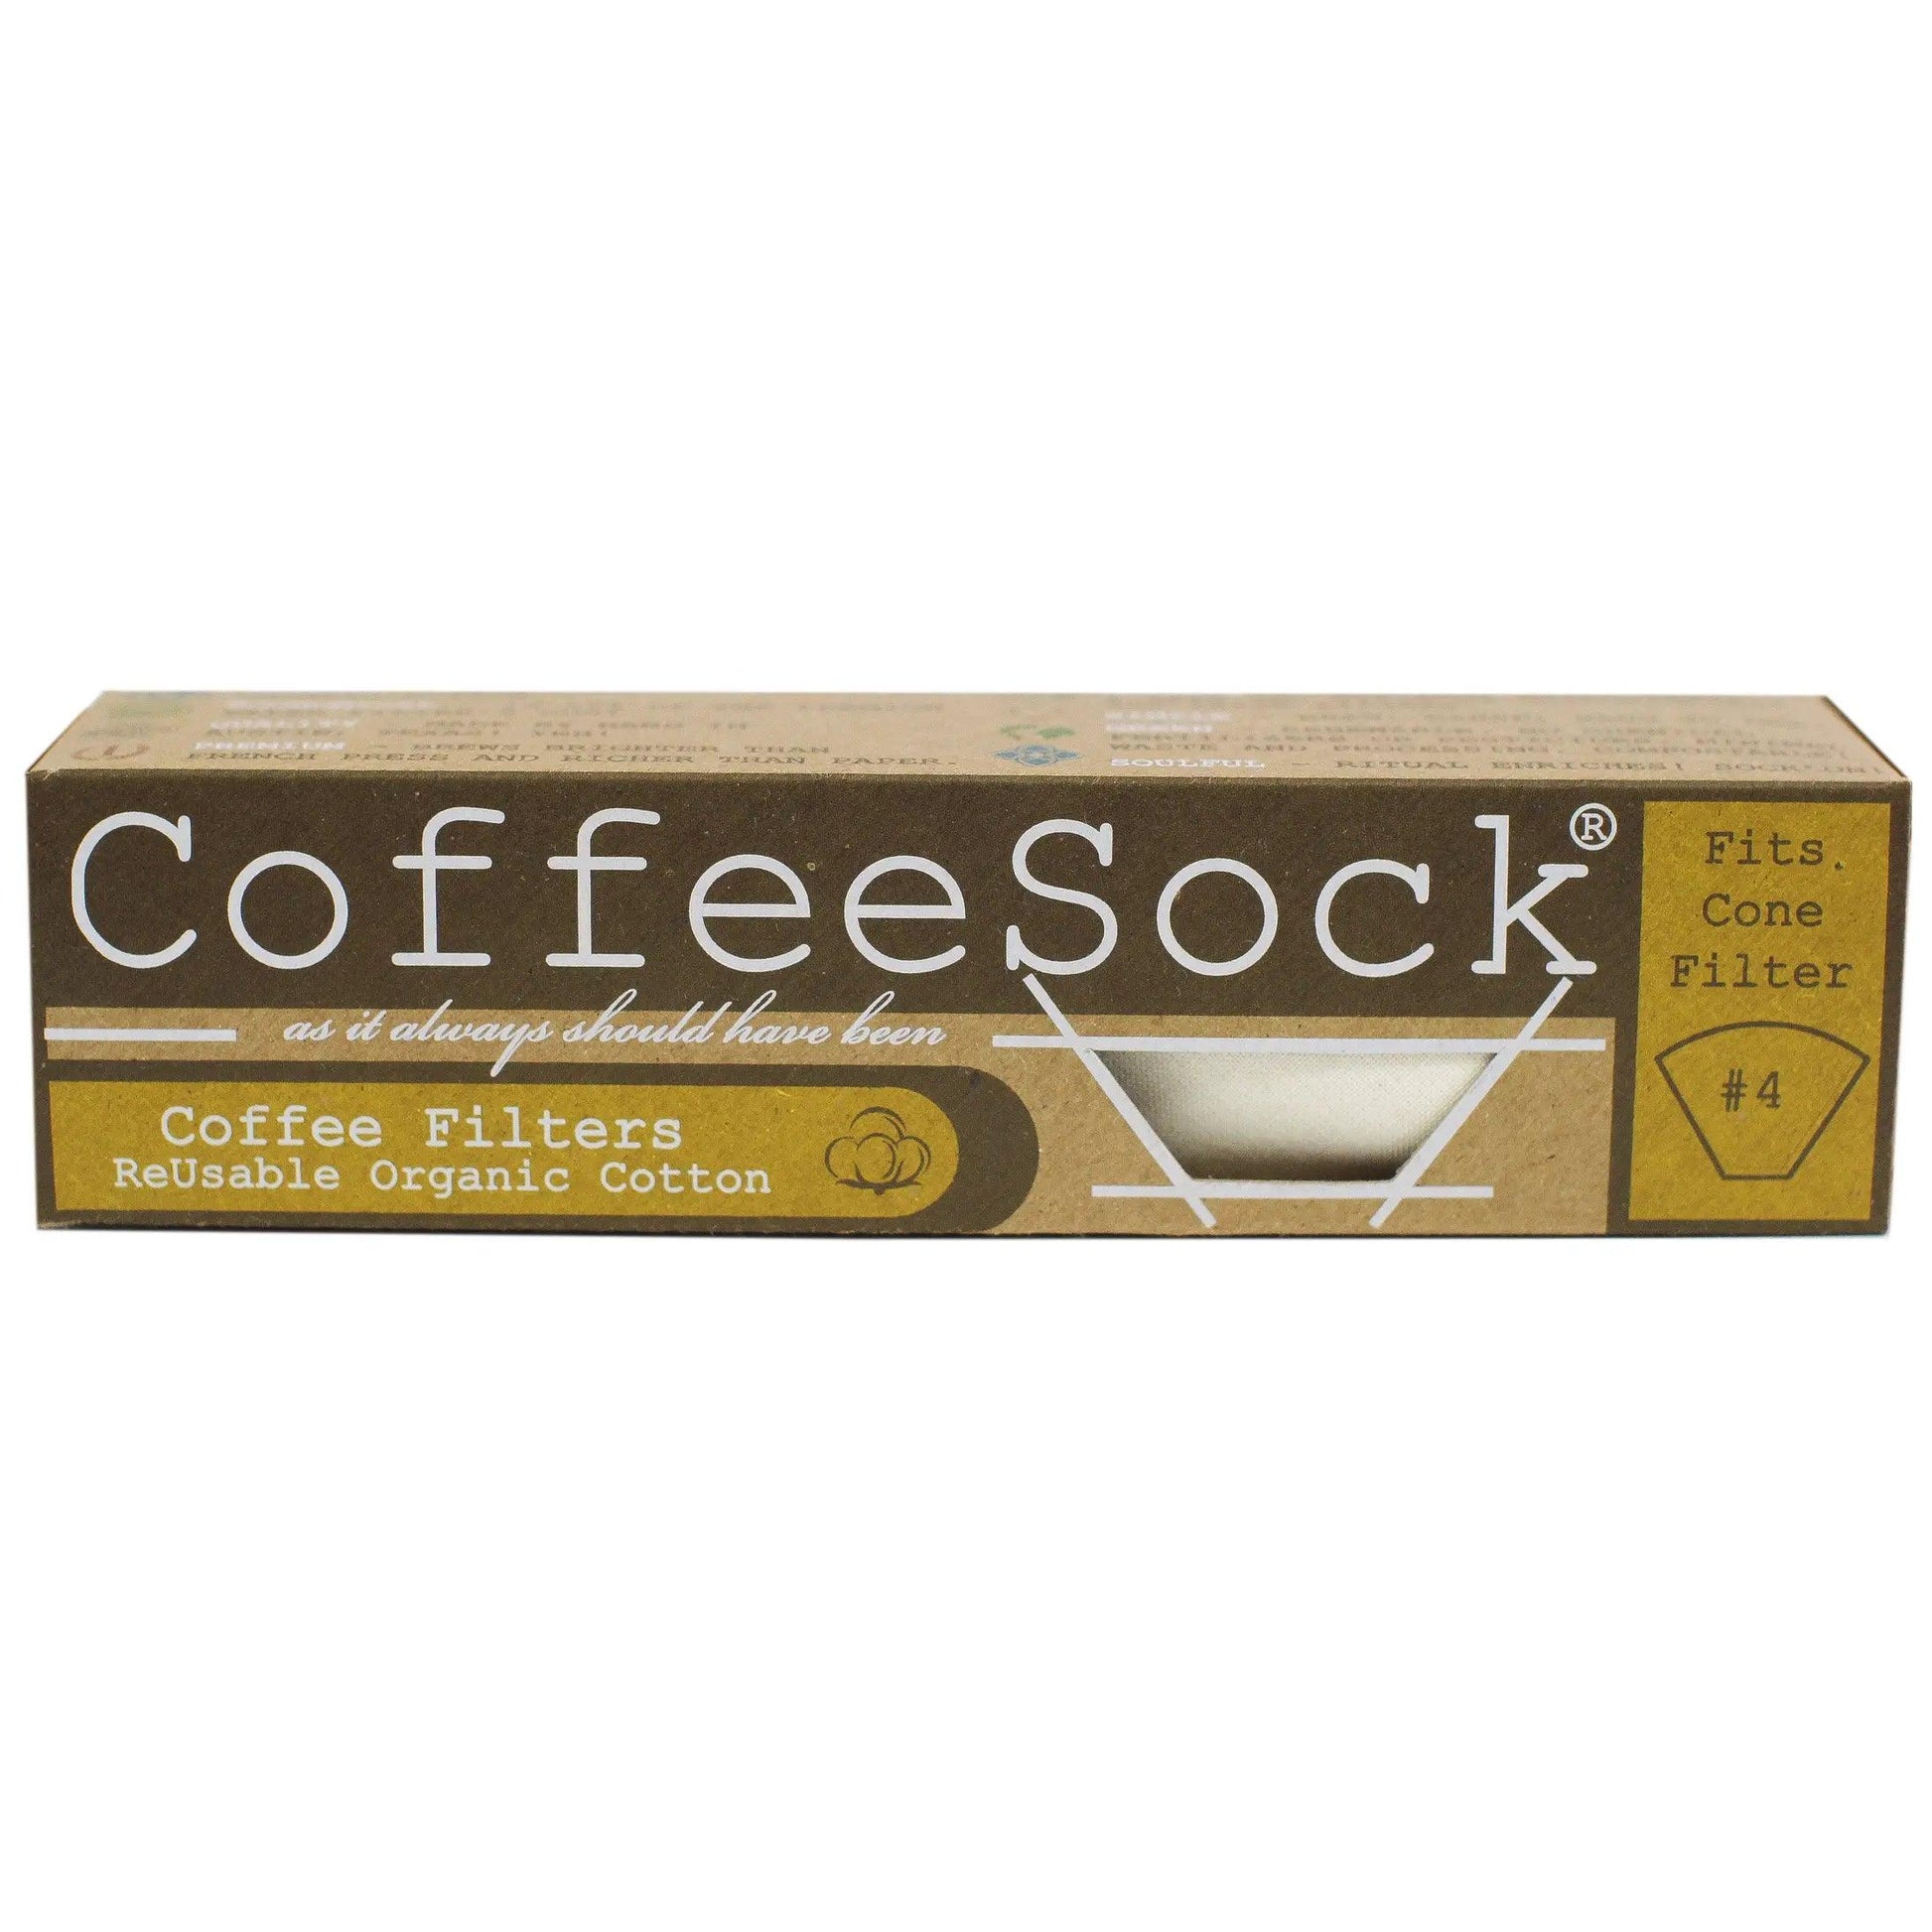 Coffee Sock Reusable Coffee Filters, Organic Cotton - #4 Cone Filter, Drip - Ninth & Pine